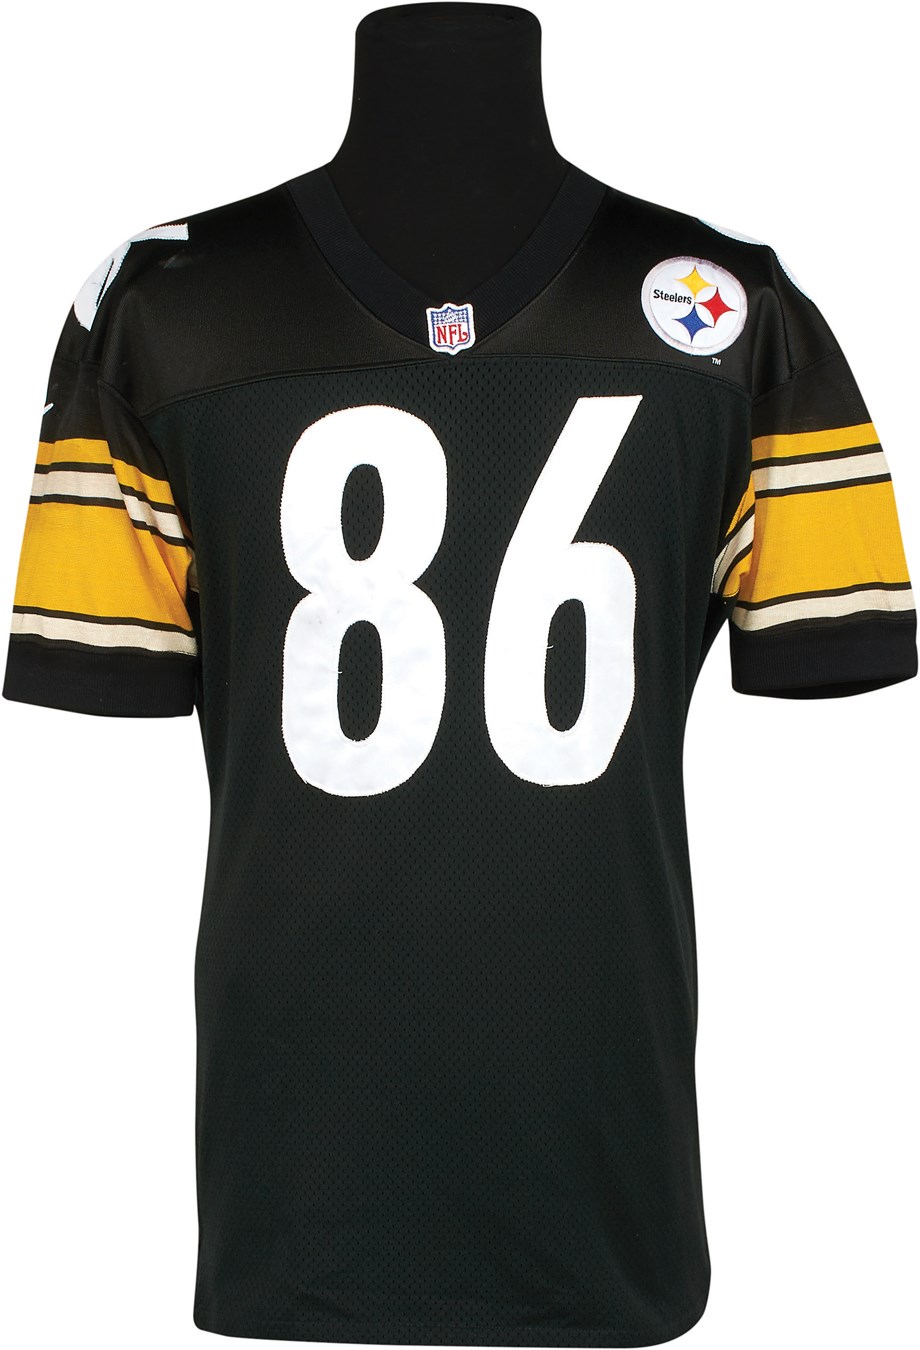 The Pittsburgh Steelers Game Worn Jersey Archive - 1998 Hines Ward Game Worn 11/22/98 Pittsburgh Steelers Jersey (Photomatched)